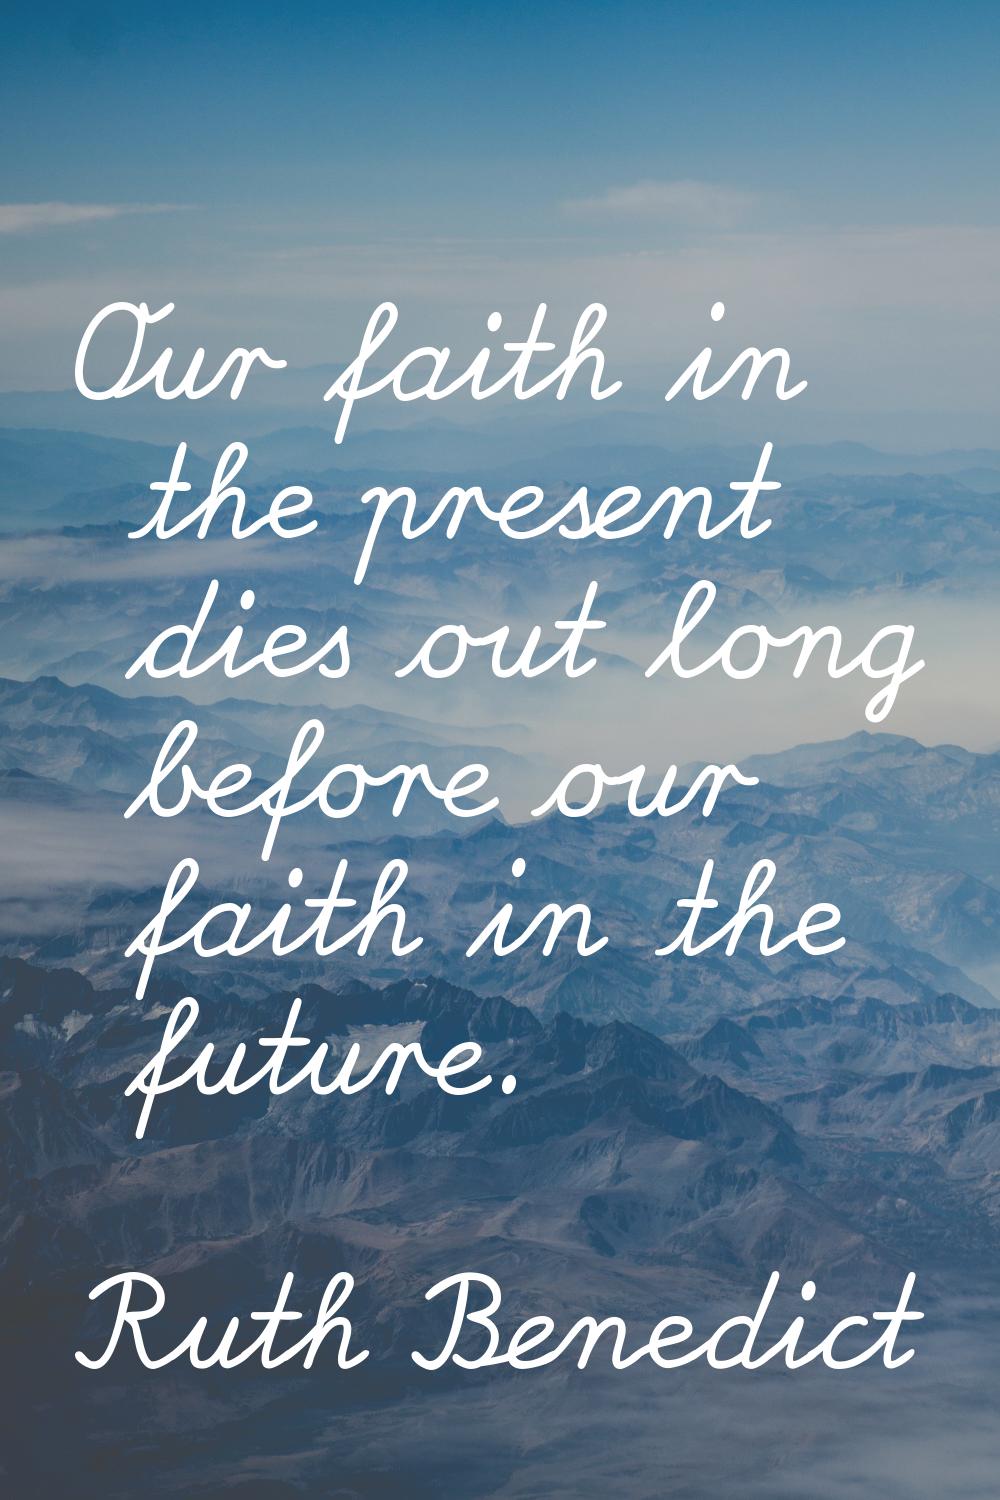 Our faith in the present dies out long before our faith in the future.